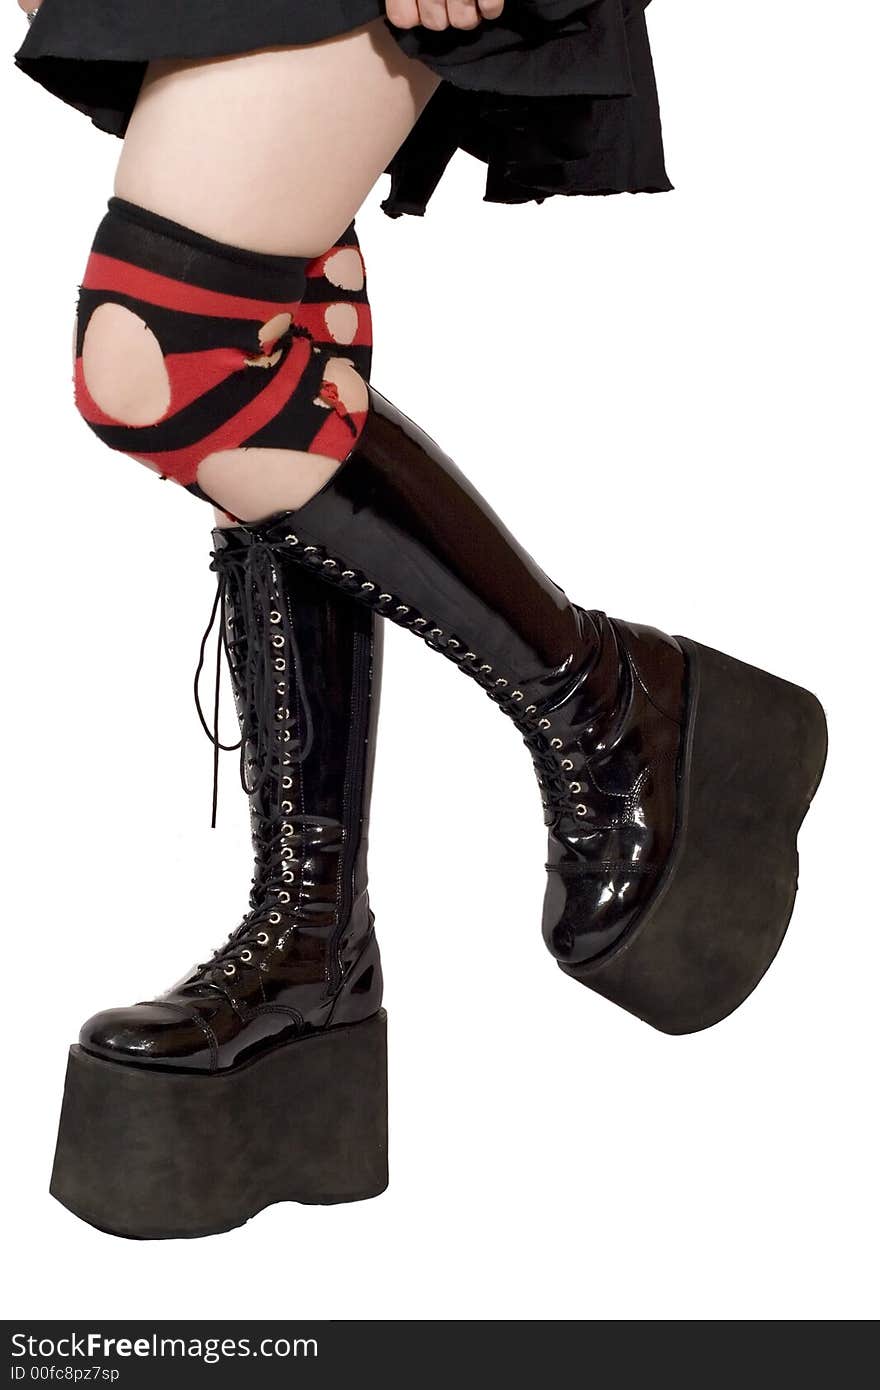 Black leather boots with big soles, being worn by a woman with ripped stripey socks